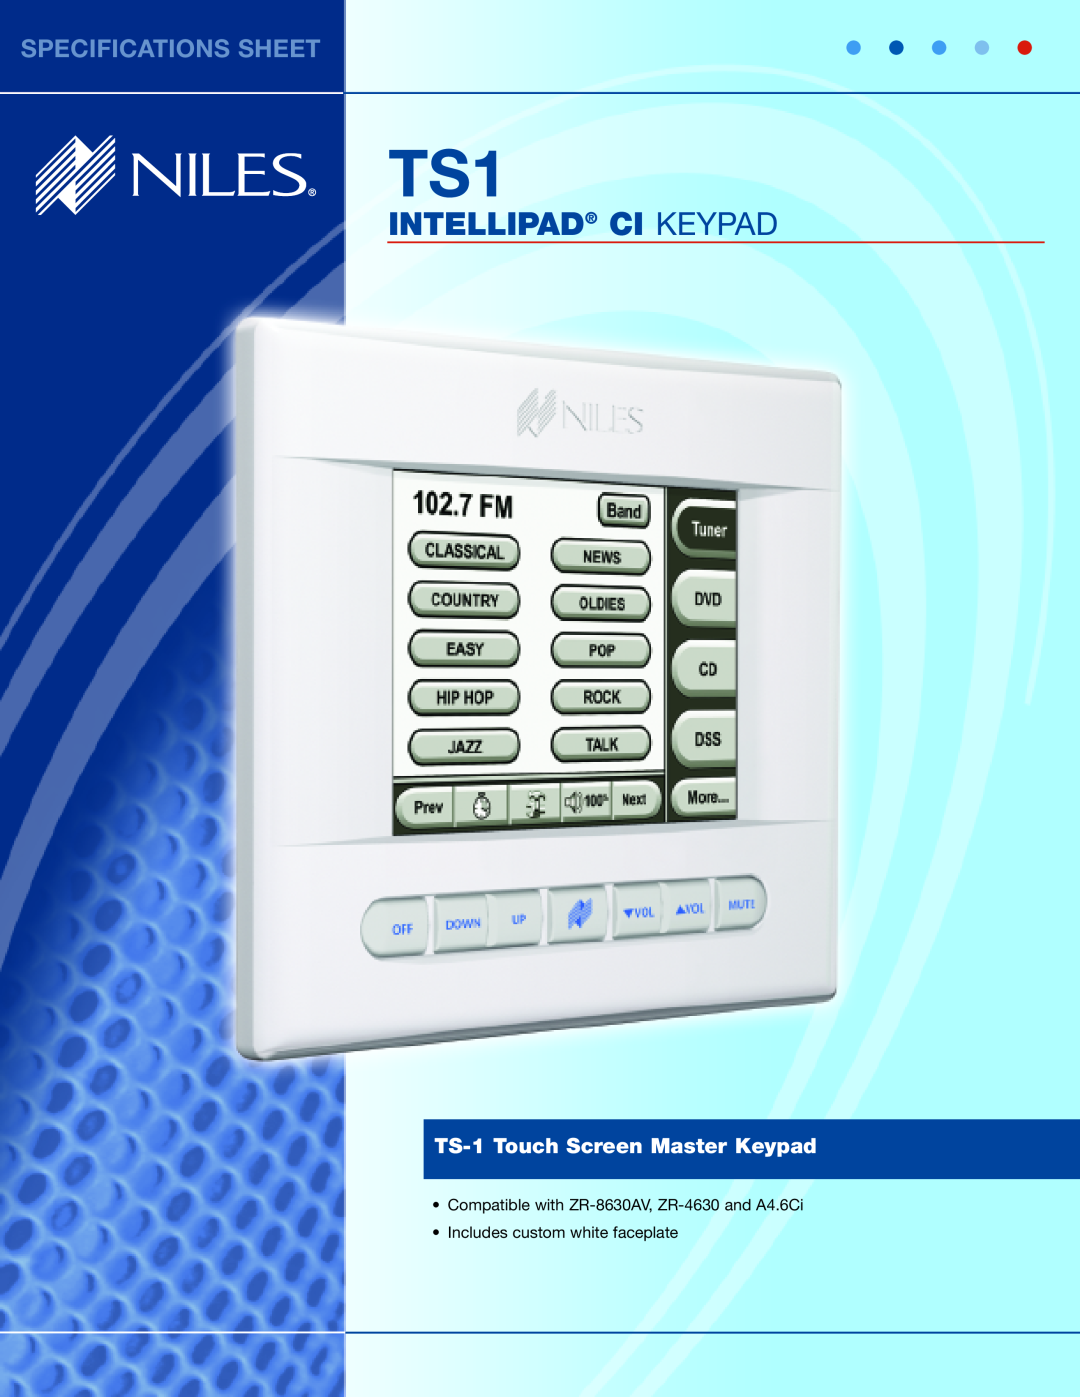 Niles Audio TS-1 specifications Compatible with ZR-8630AV, ZR-4630 and A4.6Ci, Includes custom white faceplate 